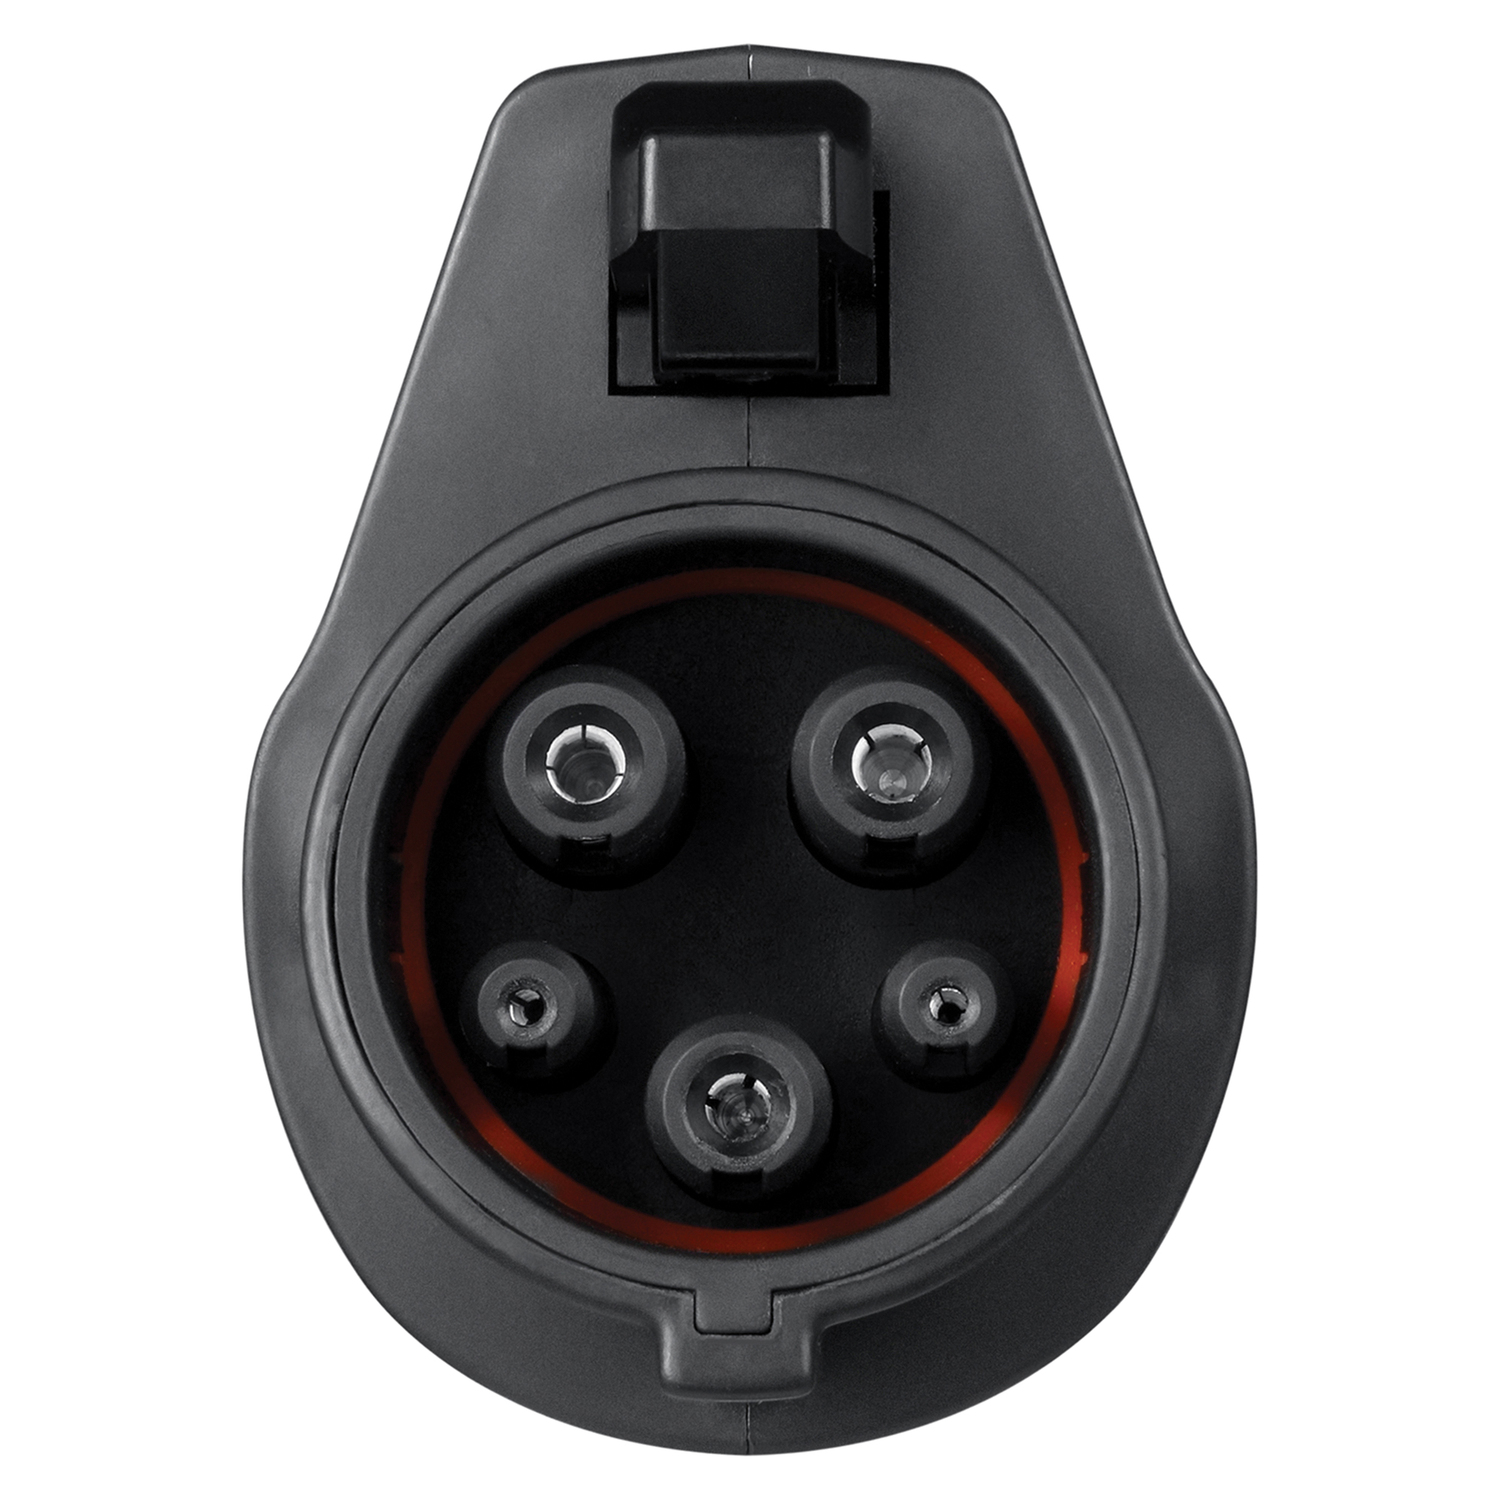 Lectron - Tesla to J1772 Charging Adapter, Max 48A & 250V - Compatible with Tesla High Powered Connectors, Destination Chargers, and Mobile Connector | Only For J1772 EVs - image 4 of 4